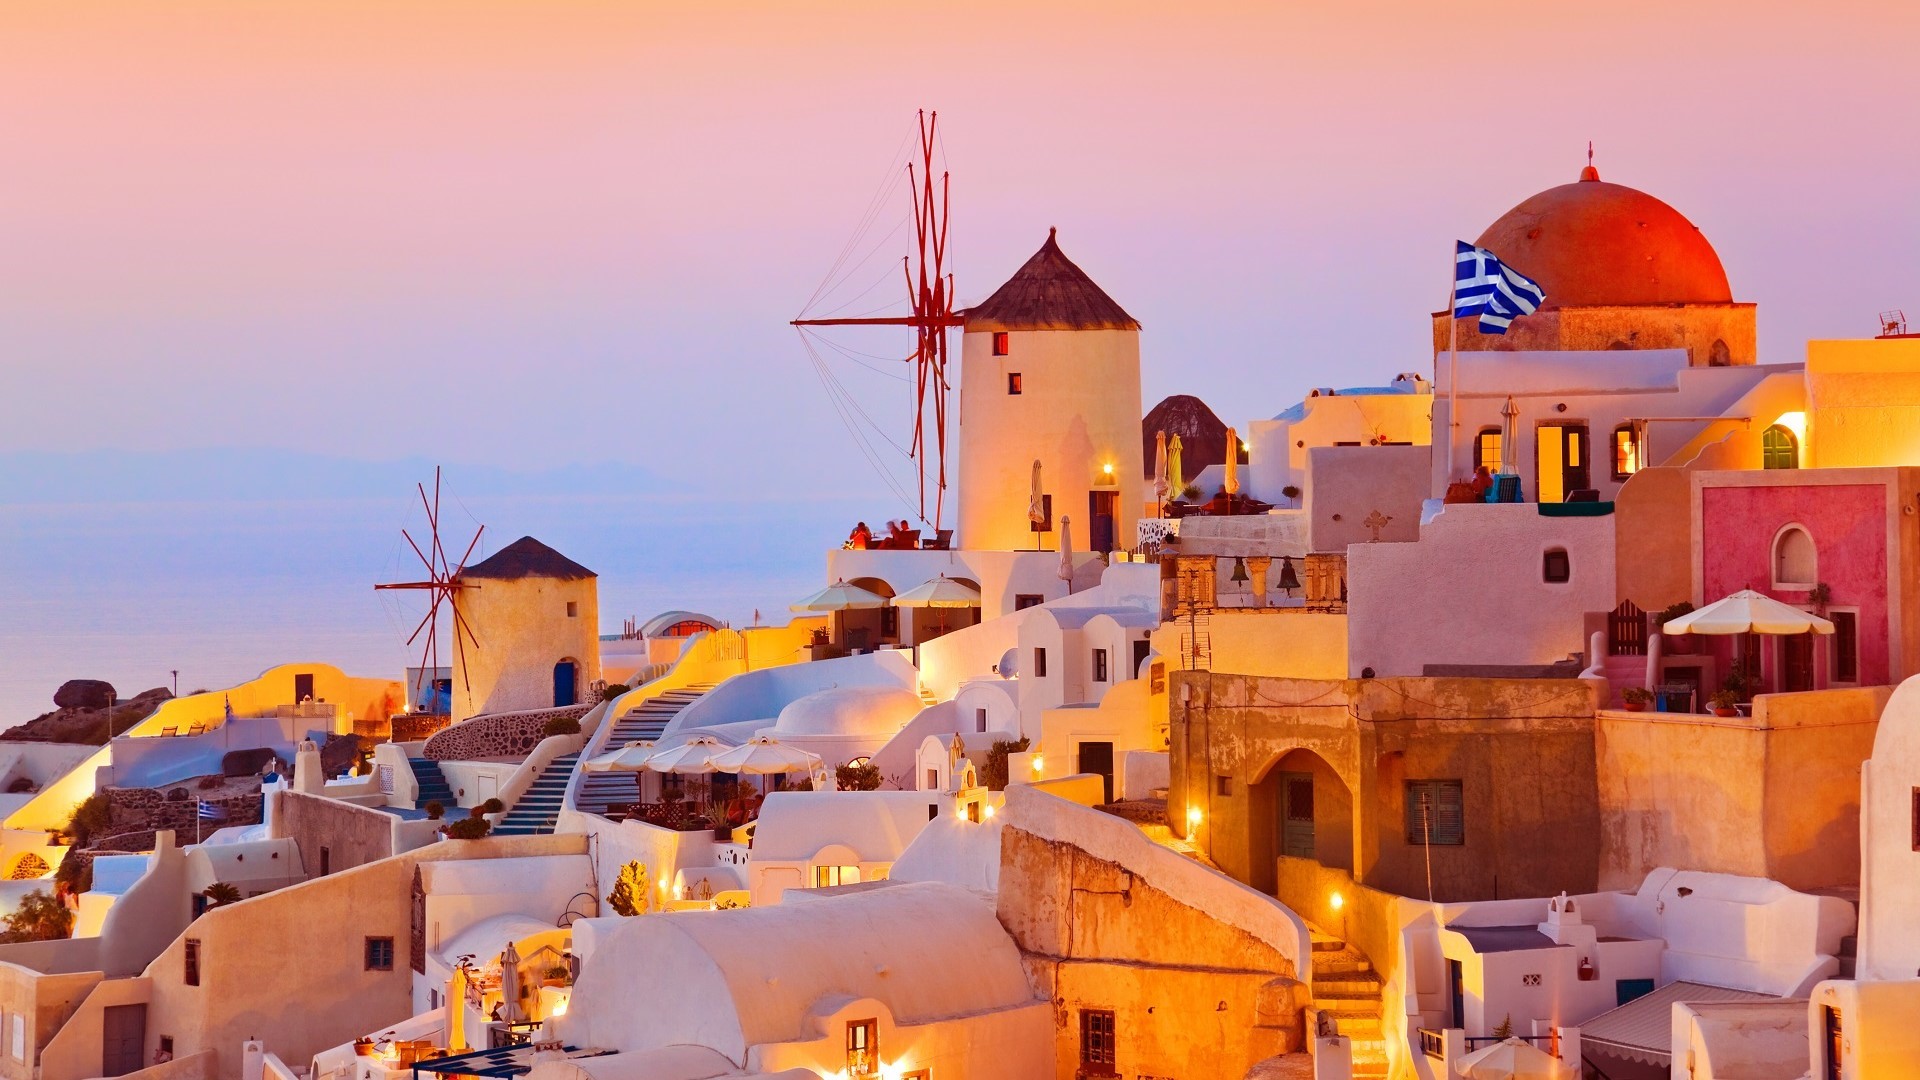 This dream package around the Mediterranean has land excursions in Athens, Jerusalem and more. Sponsored by AAA Travel.